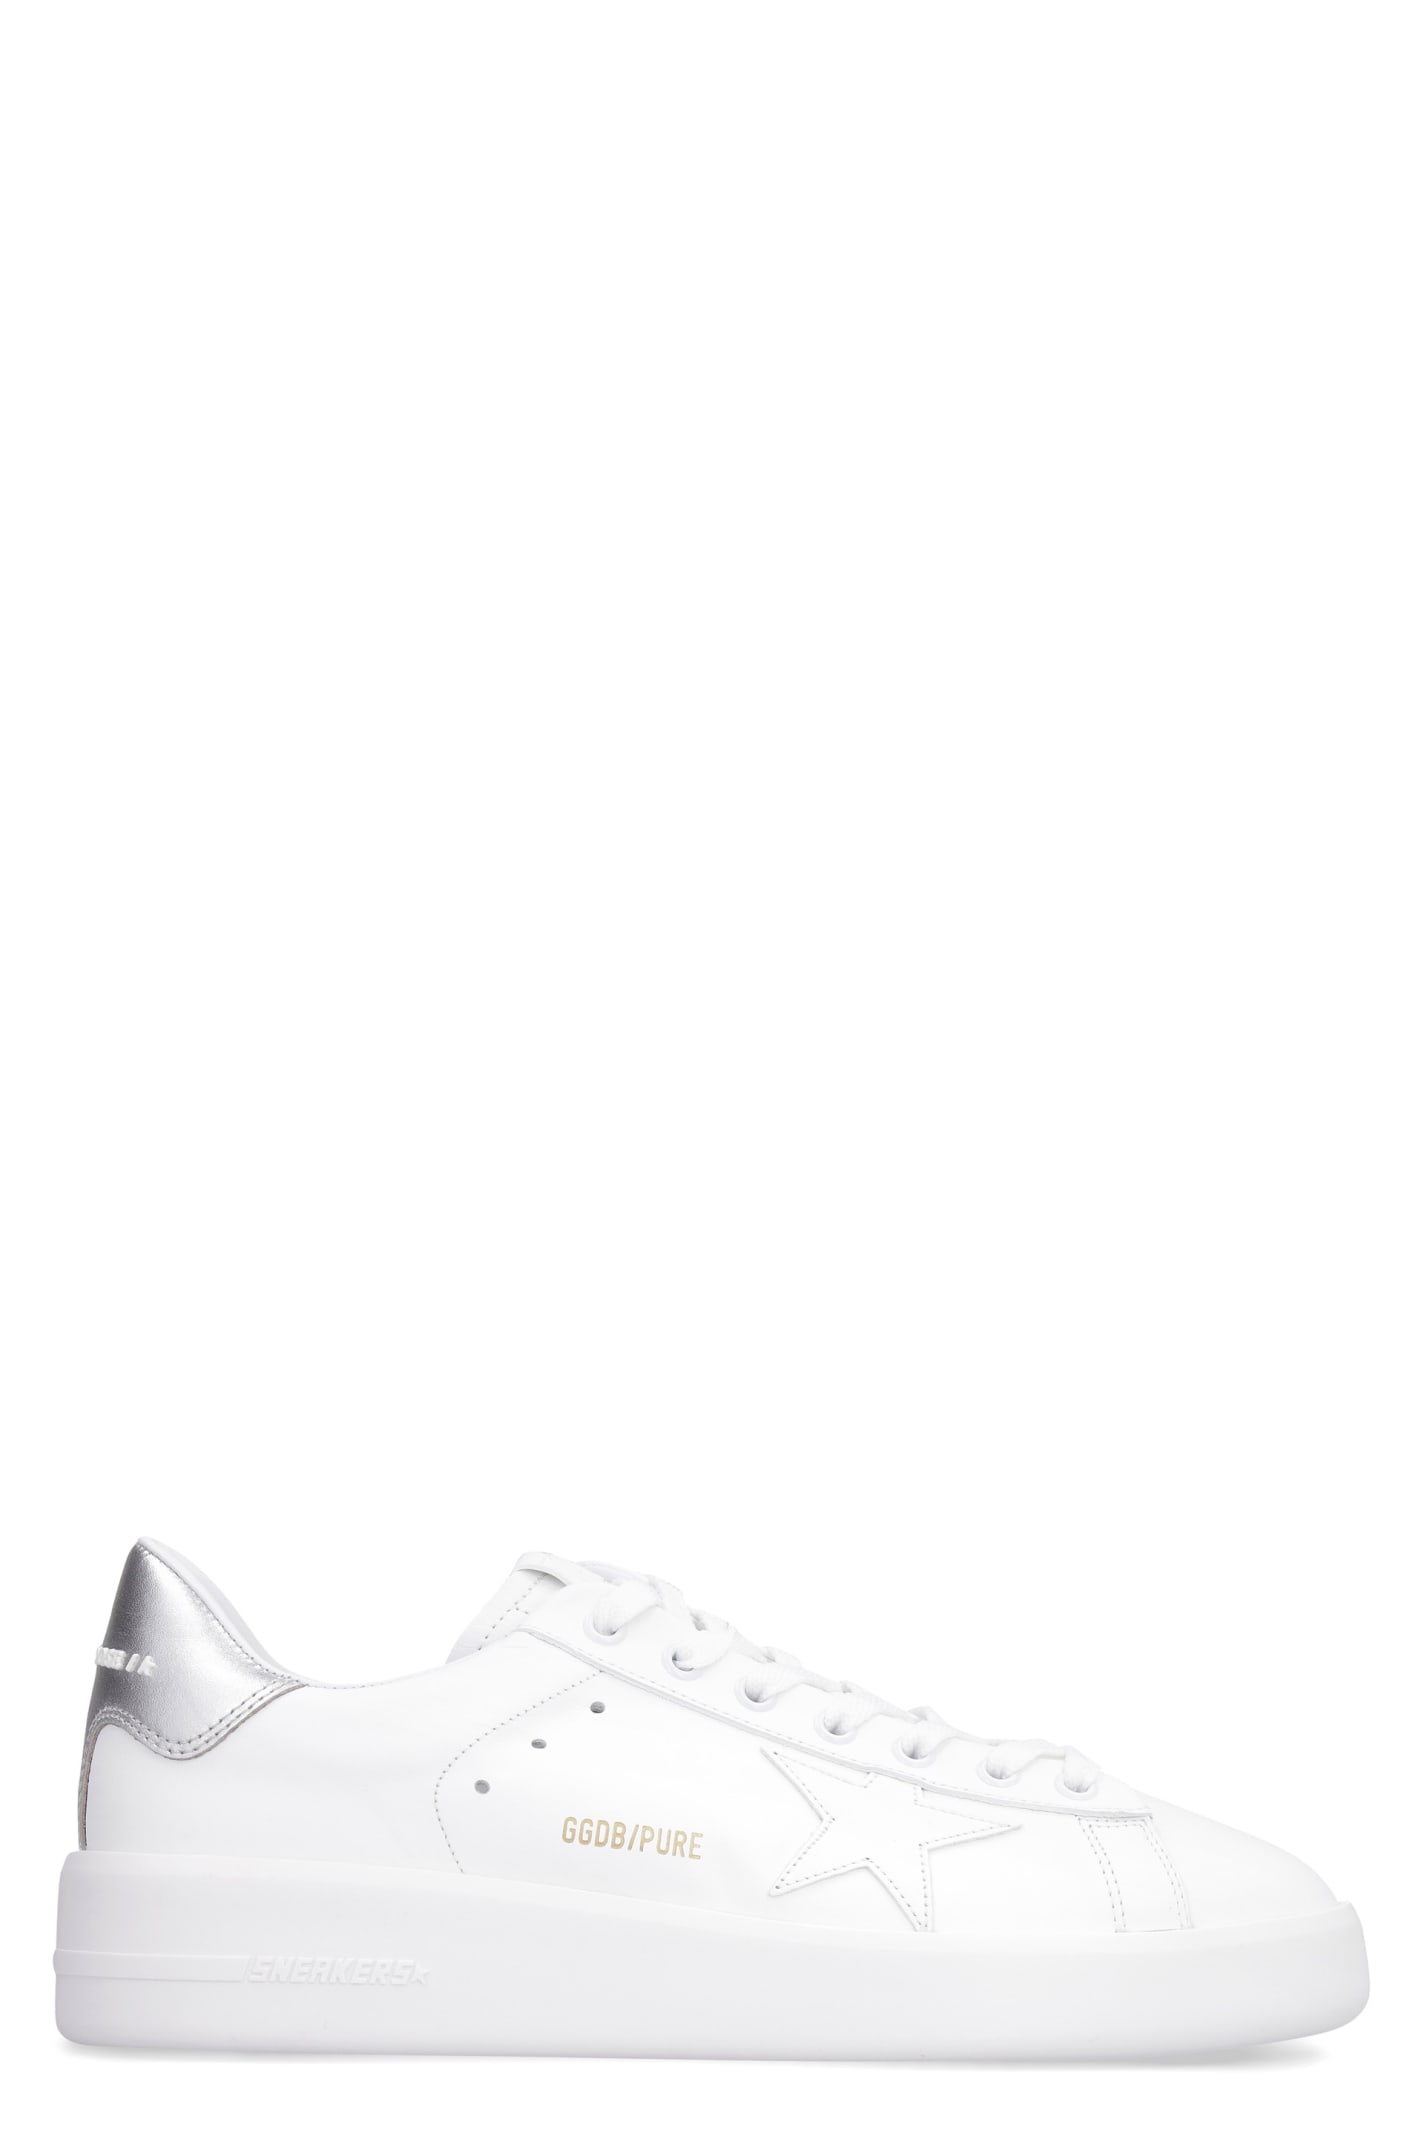 Golden Goose Pure New Leather Low-top Sneakers